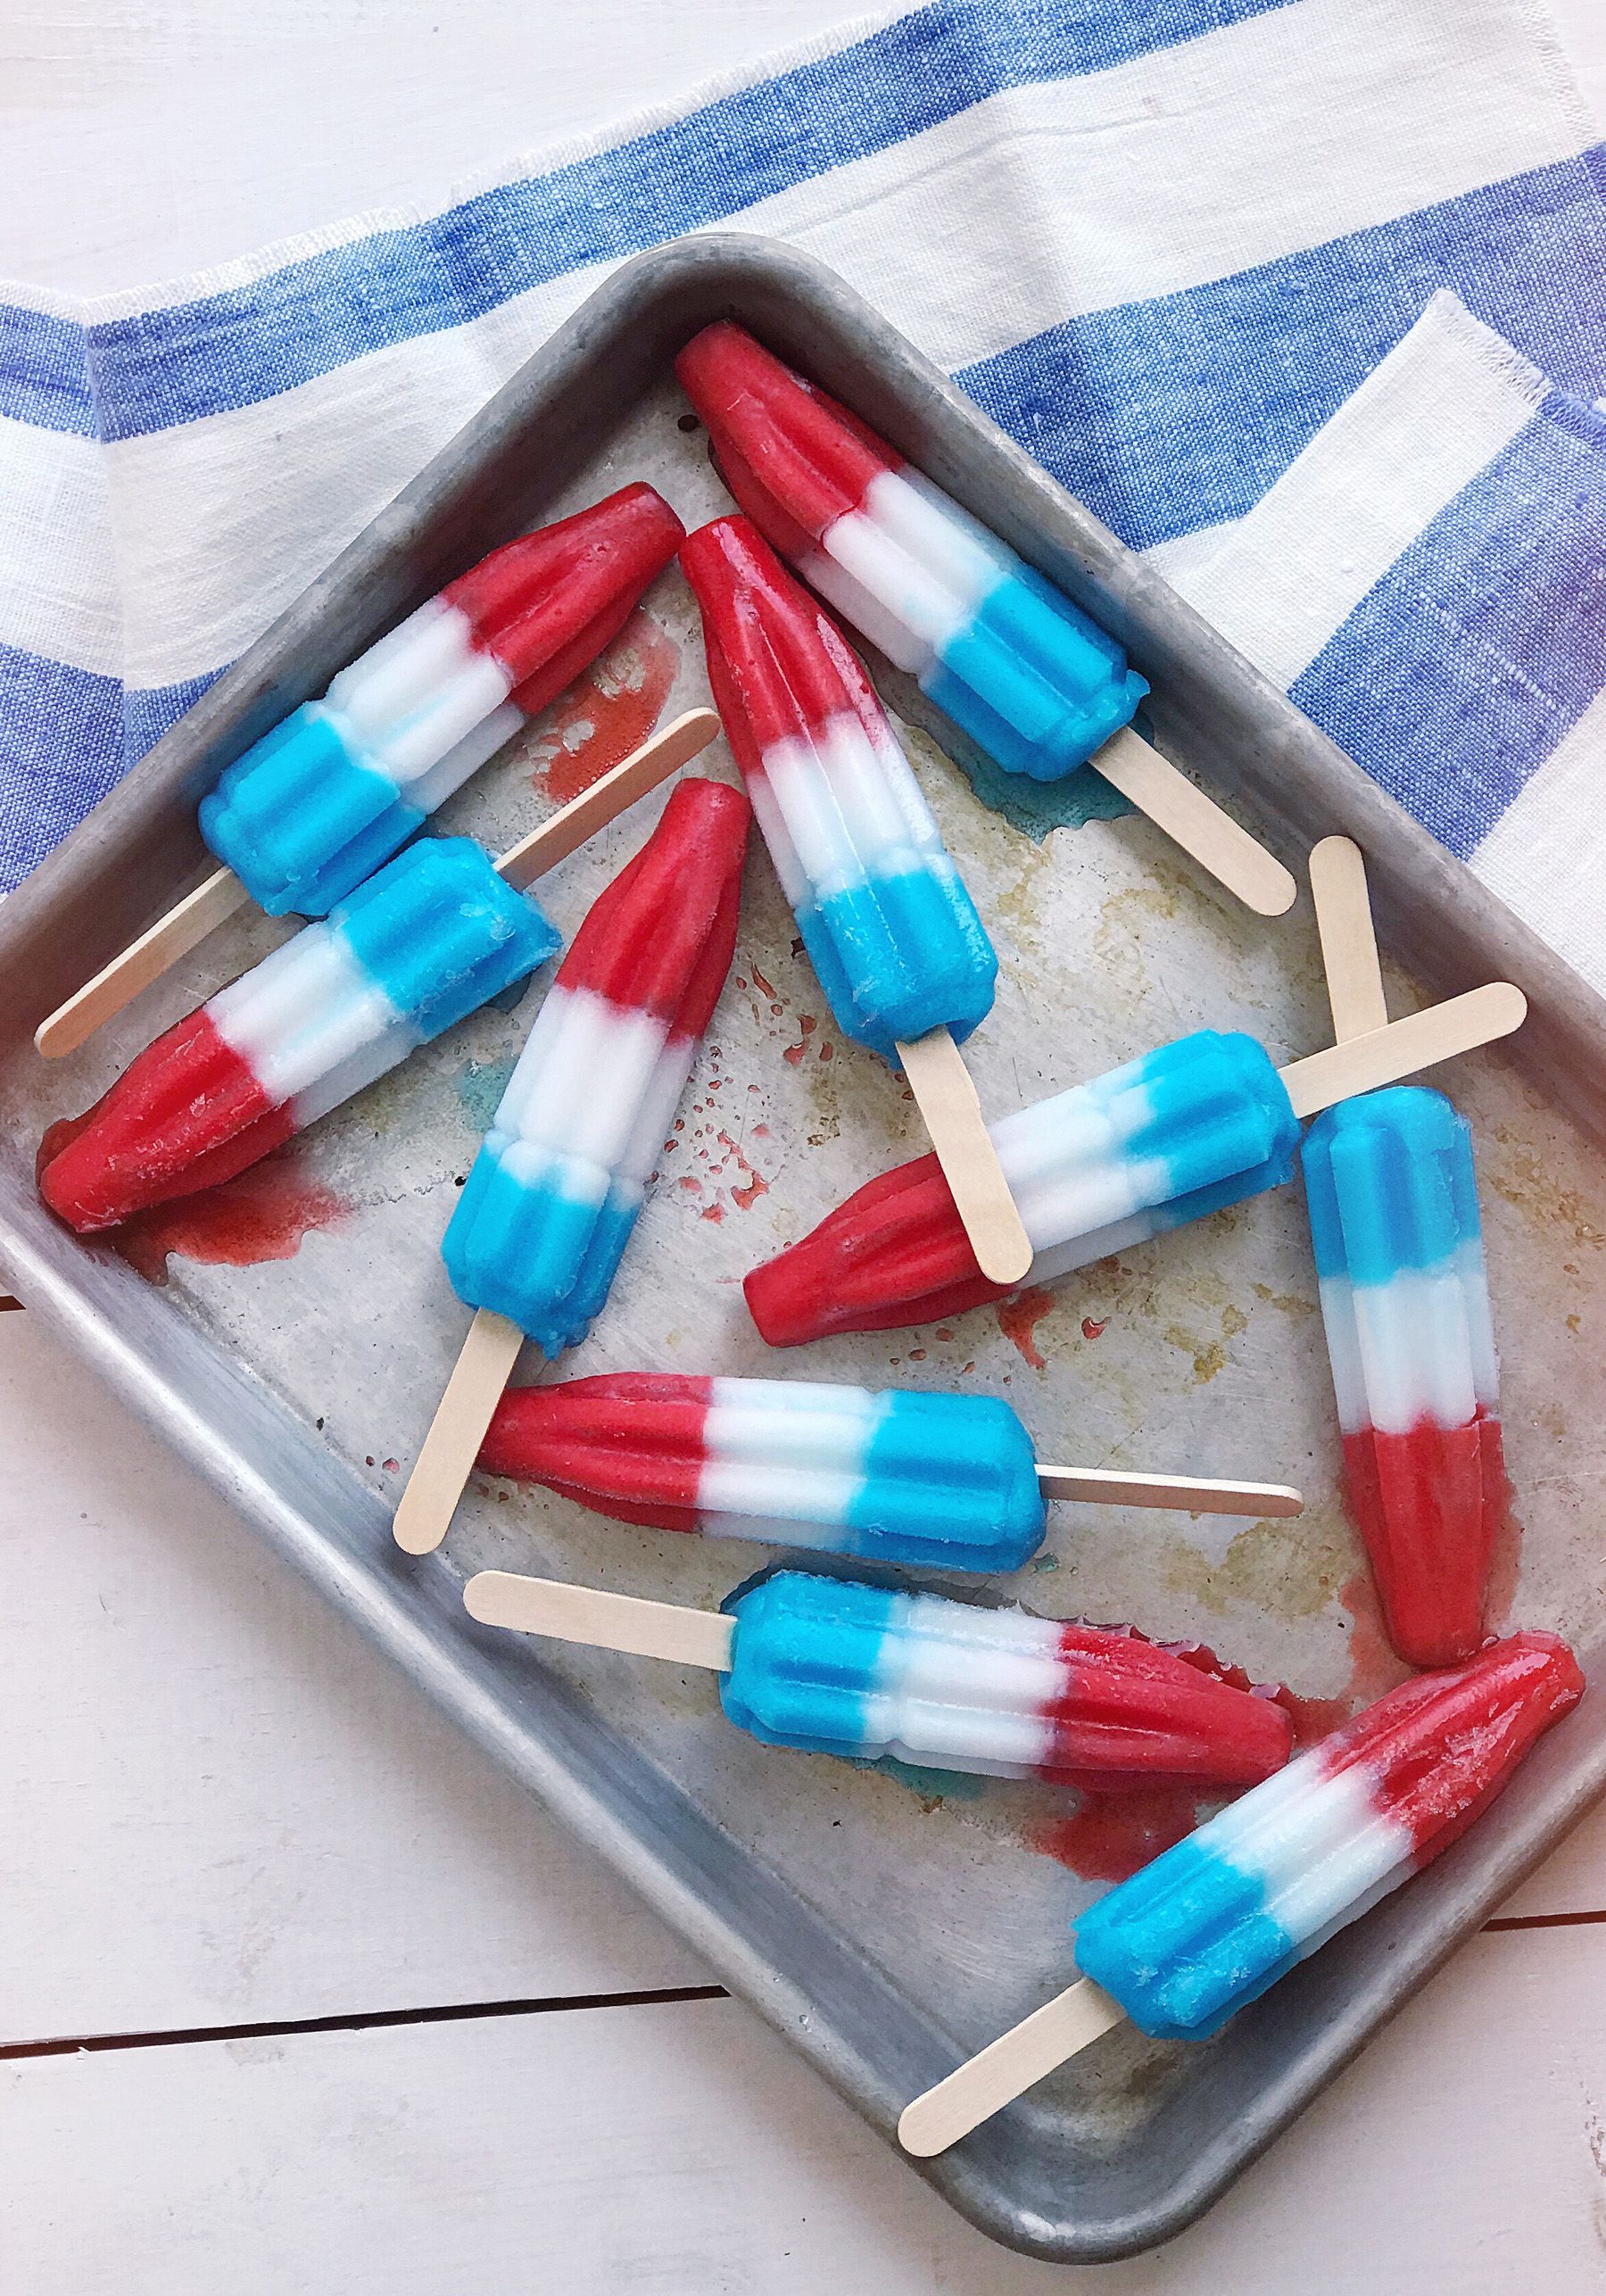 4th of July Entertaining Ideas. - 4th of July Entertaining Ideas. -   July 4th food Ideas